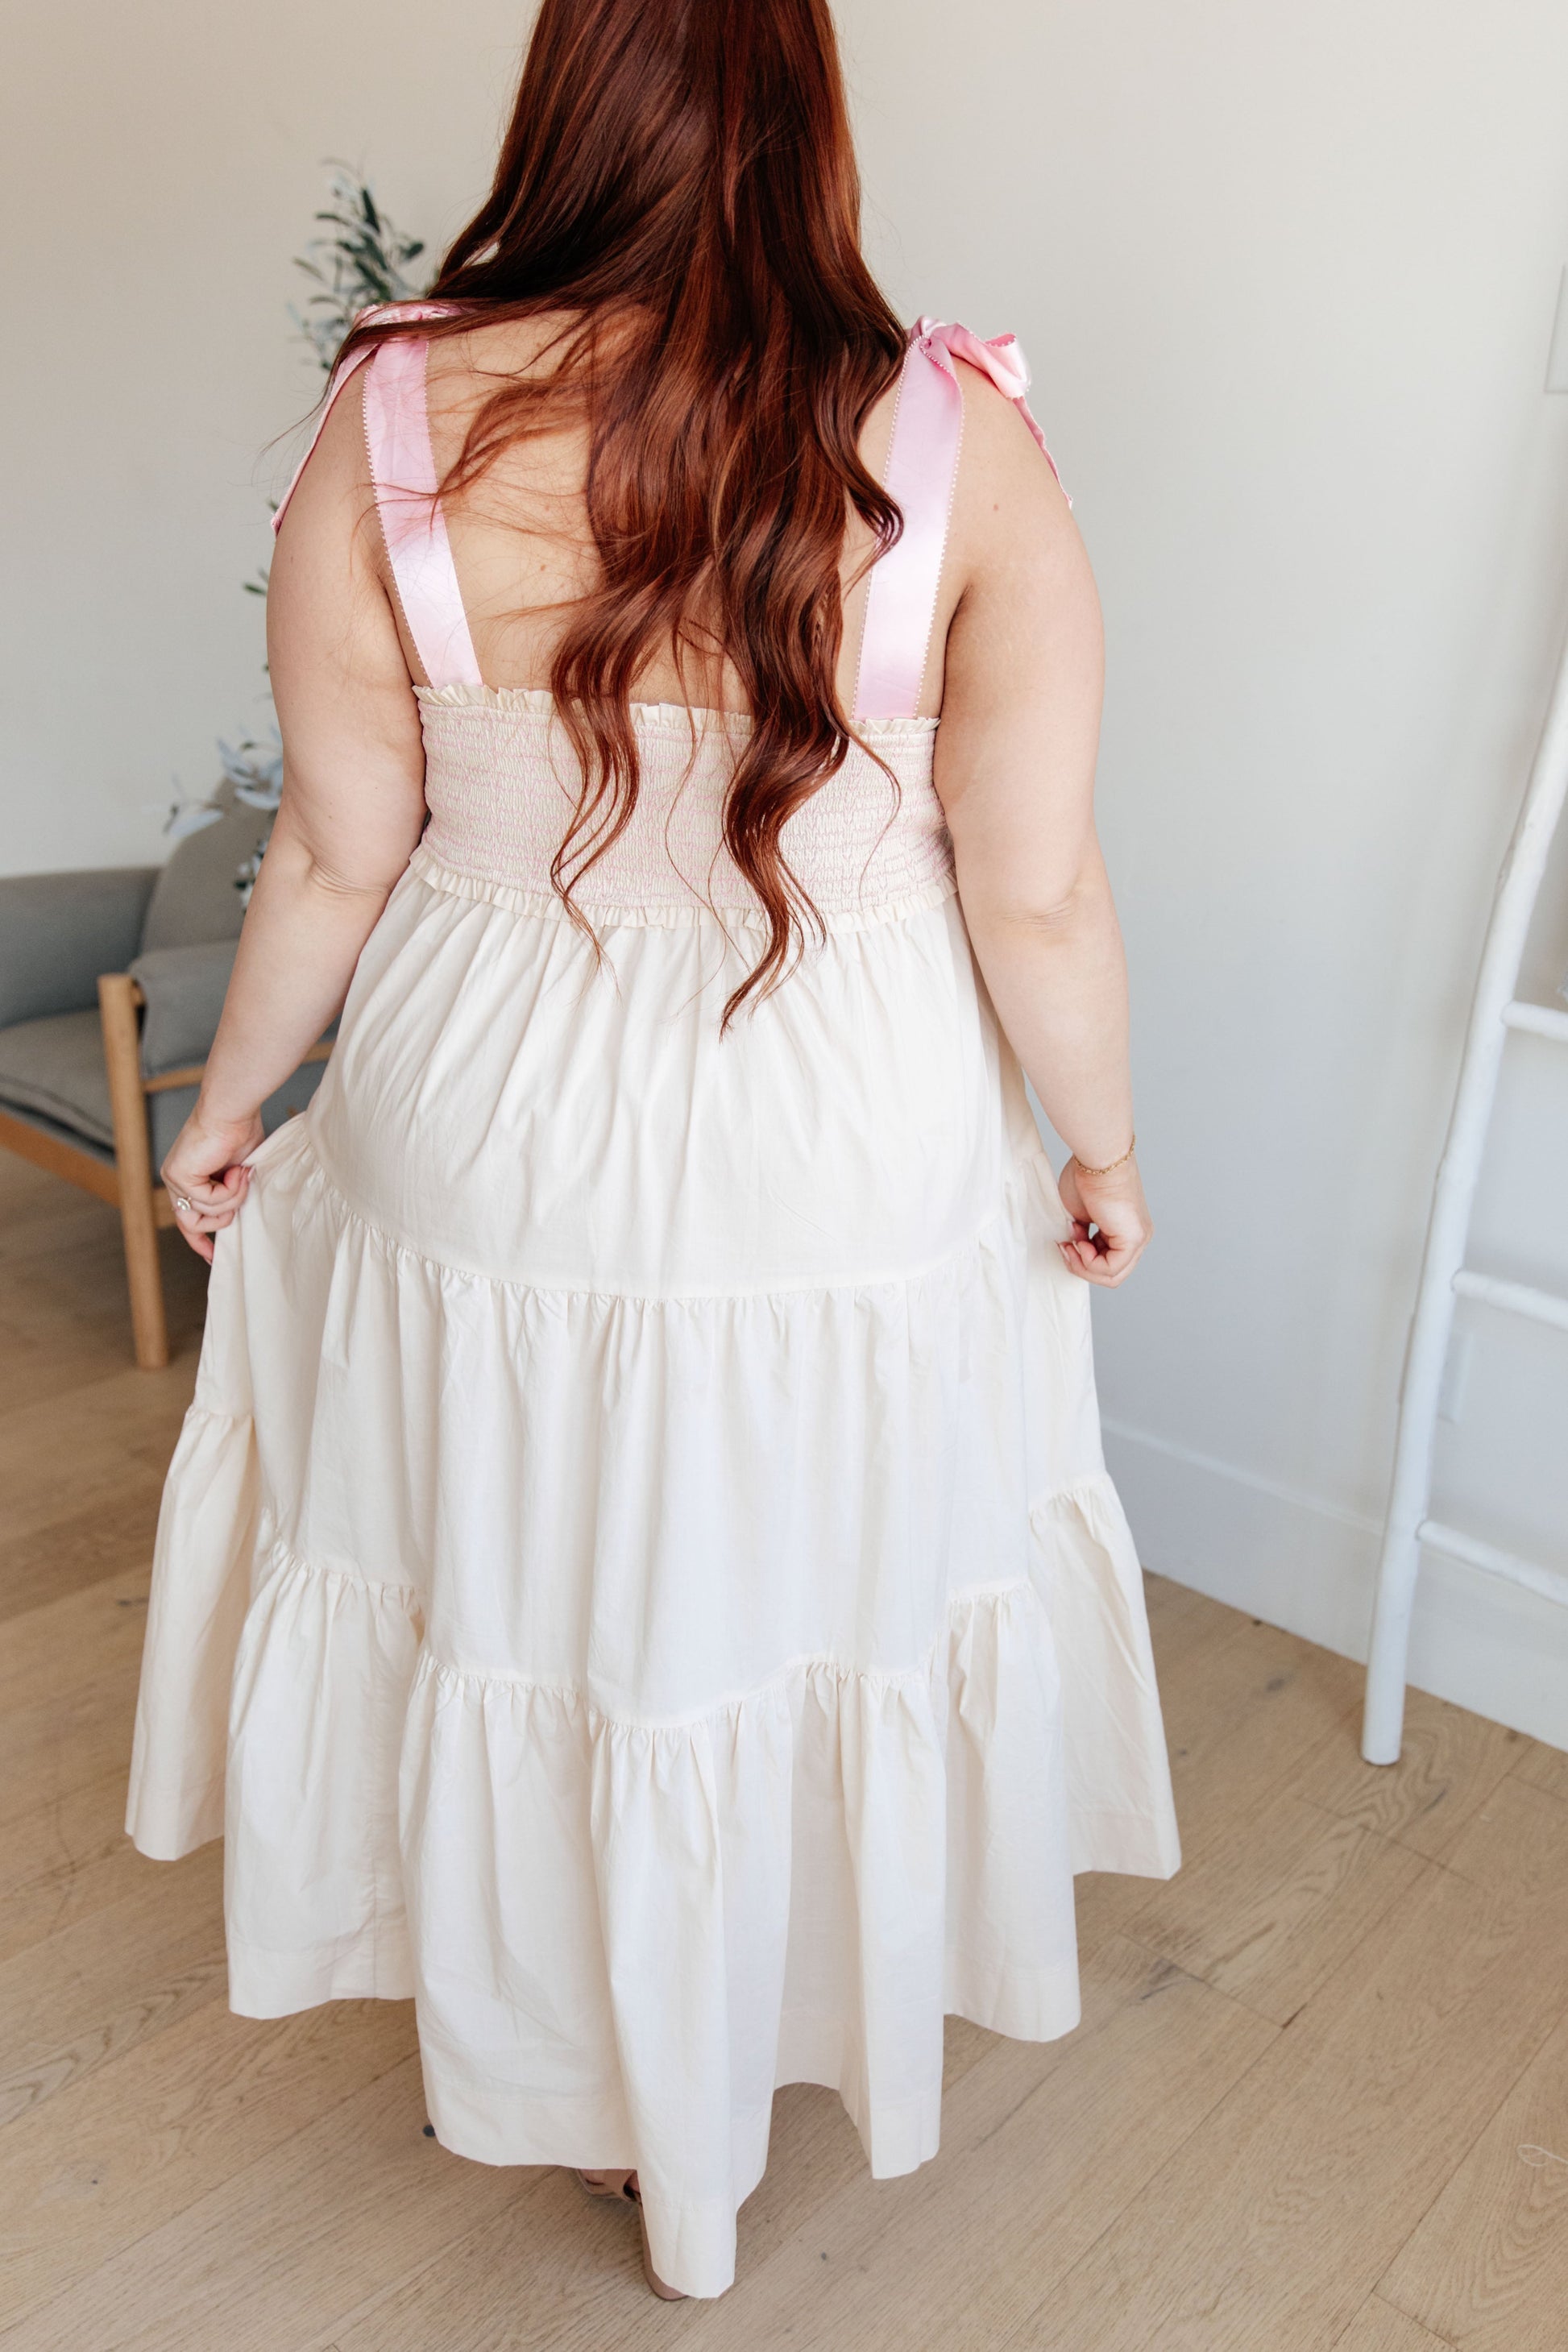 Truly Scrumptious Tiered Dress - FamFancy Boutique